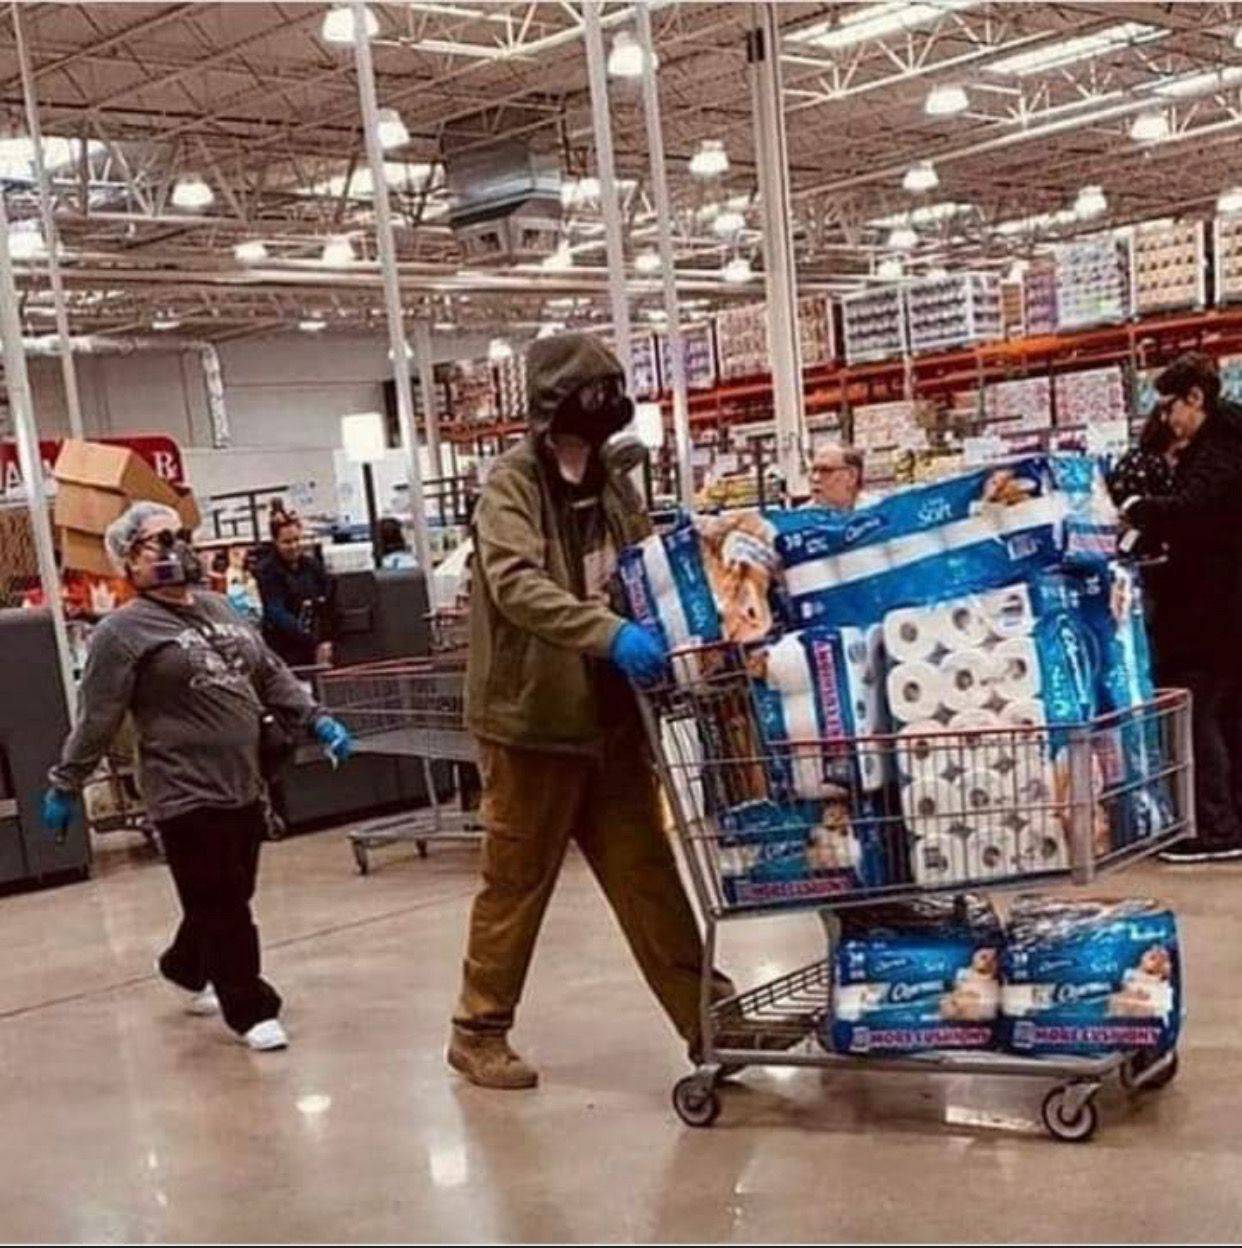 Just some average Costco shoppers in 2020